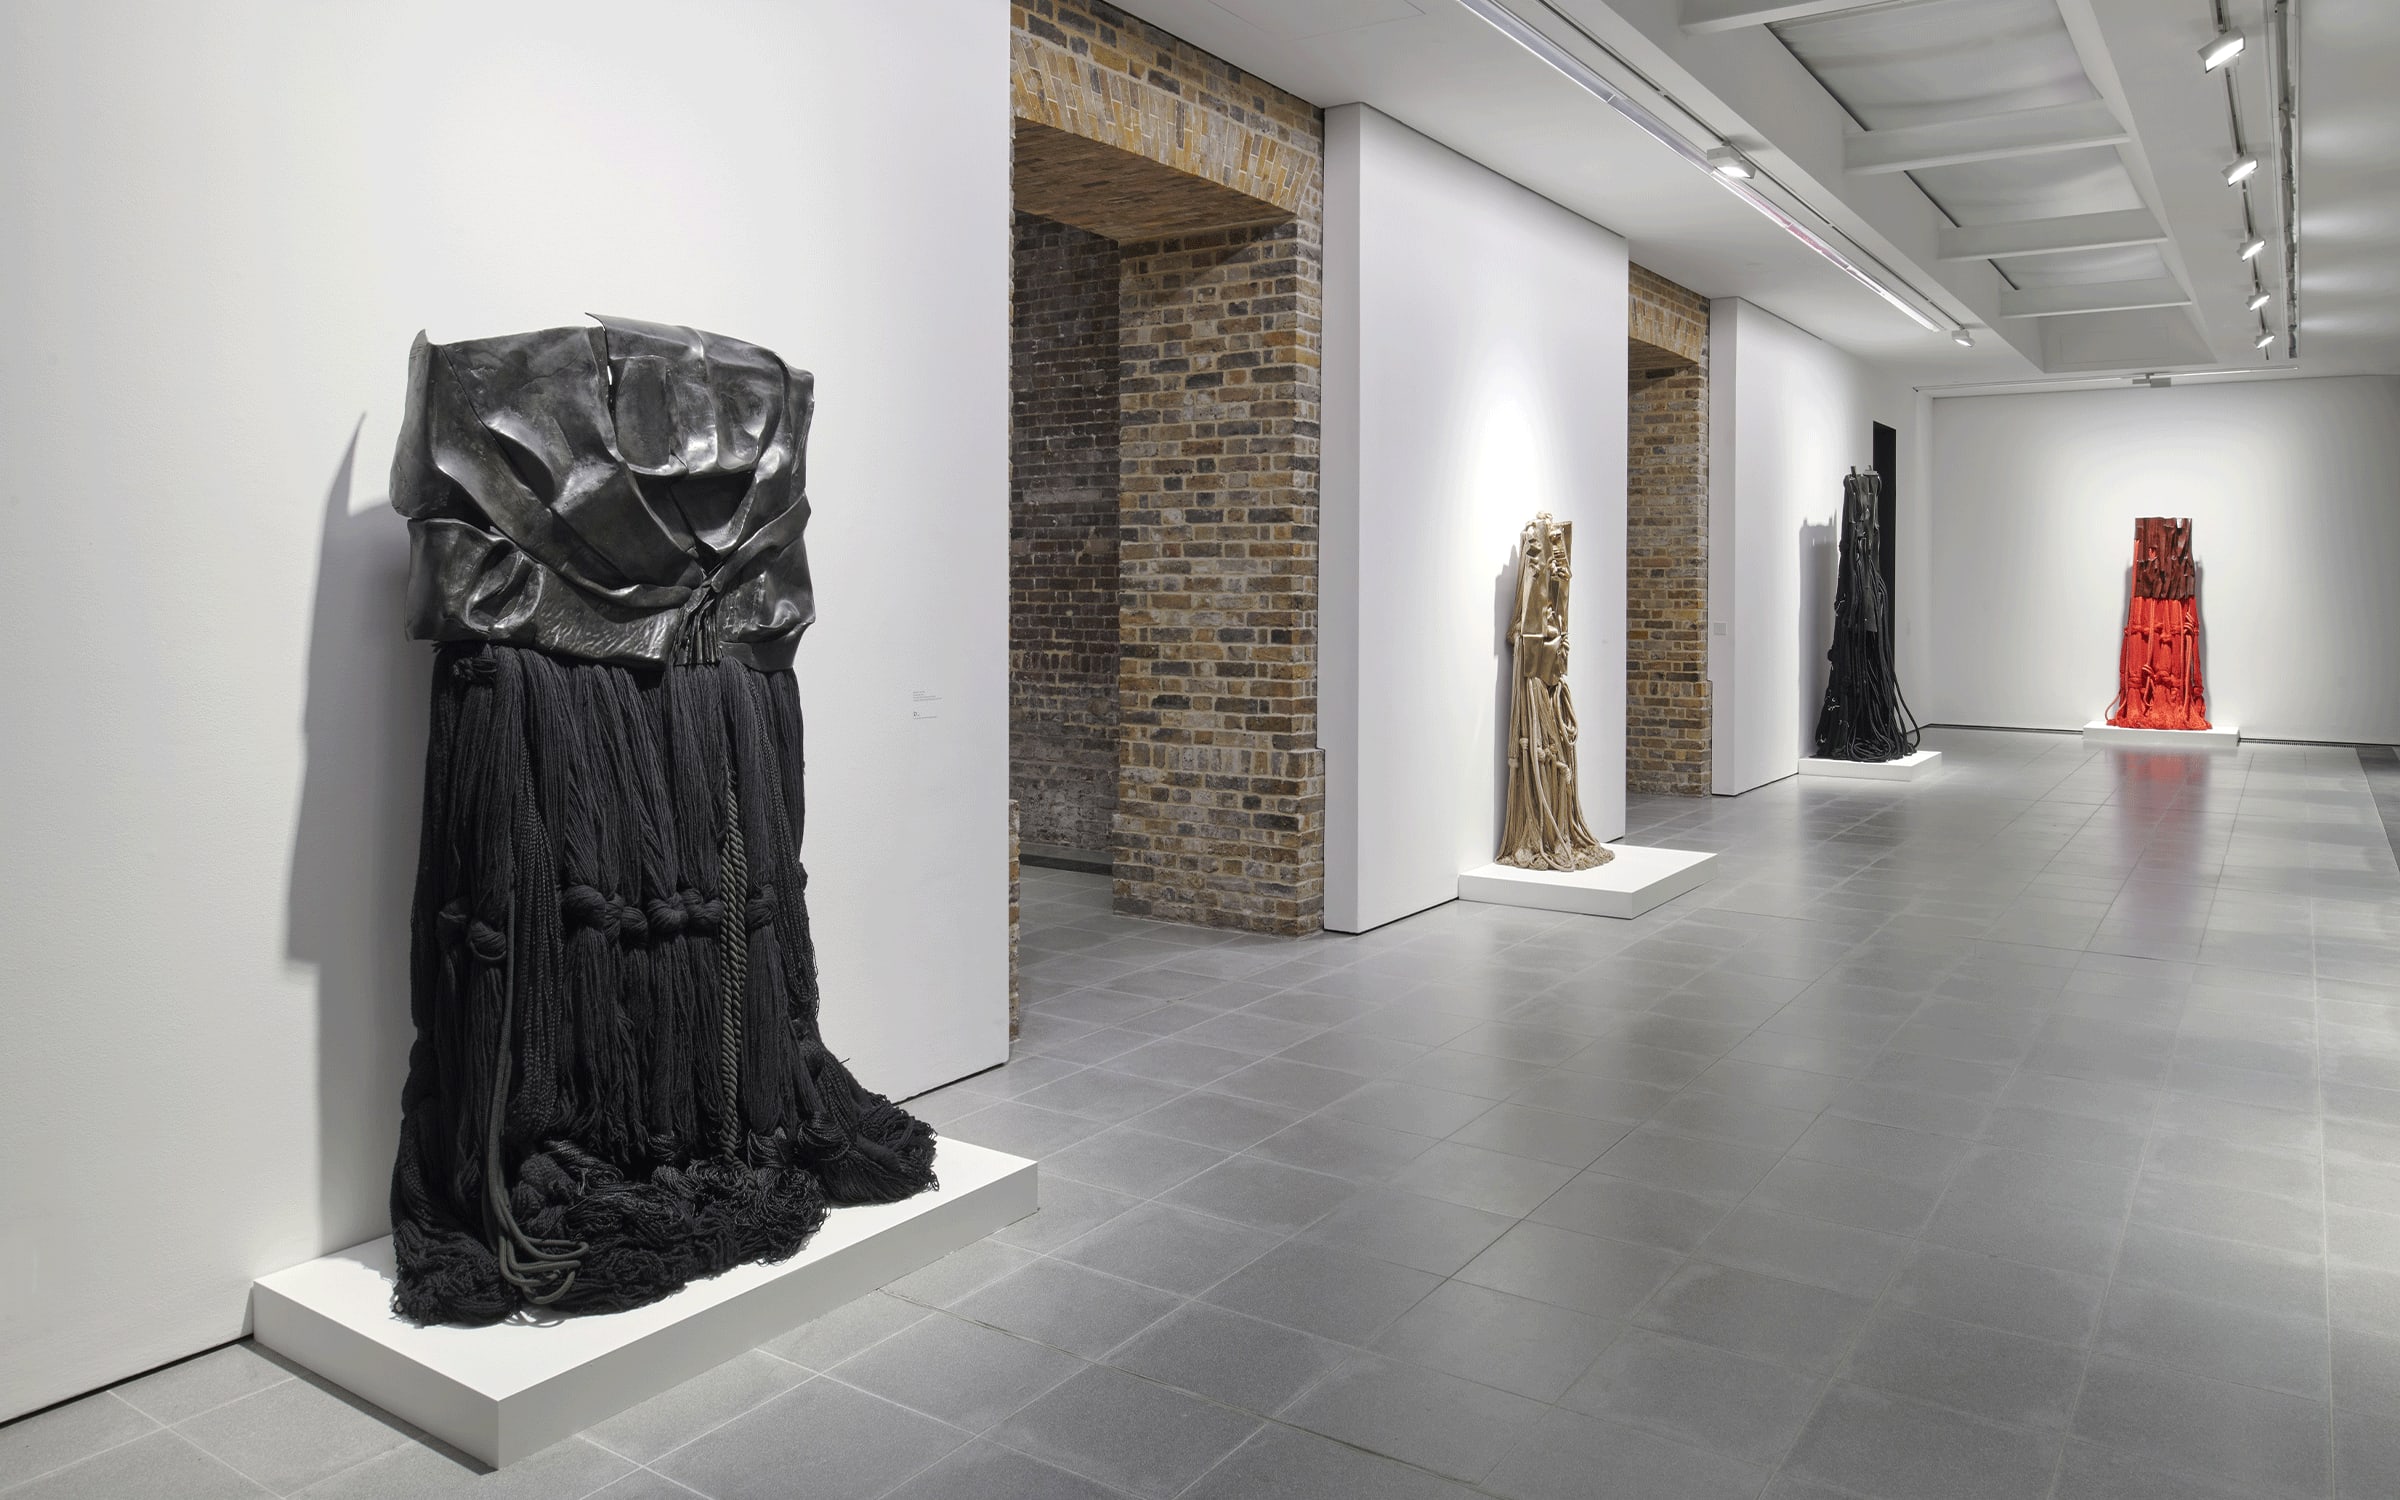 Installation view of Barbara Chase-Riboud’s exhibition ‘Infinite Folds’ at Serpentine North, London, 2022. Photograph by Jo Underhill. Courtesy of the artist and Serpentine.